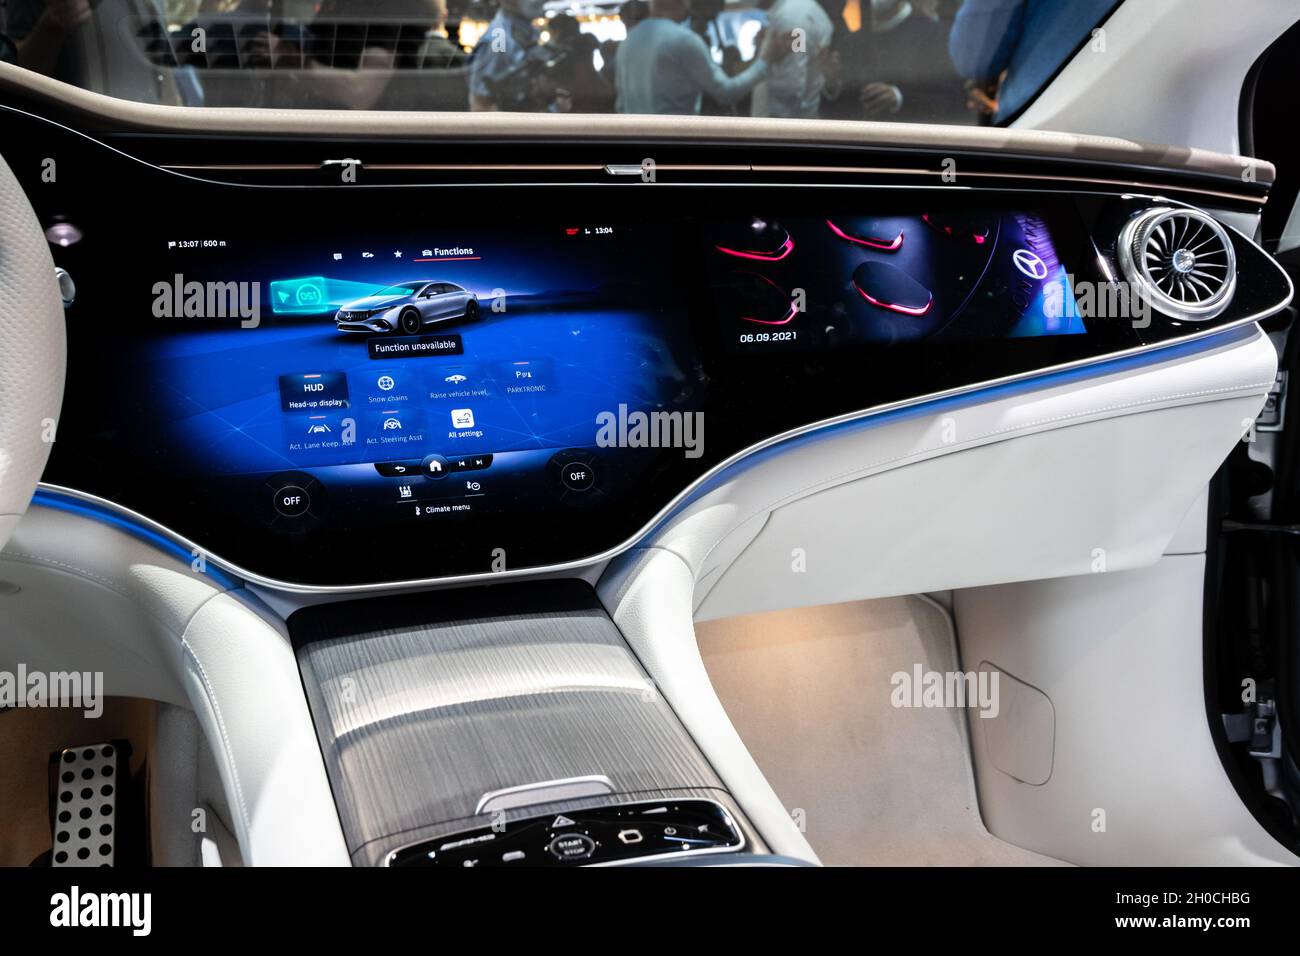 Interior view of the Mercedes-AMG EQS 53 full electric performance car showcased at the IAA Mobility 2021 motor show in Munich, Germany - September 6, Stock Photo